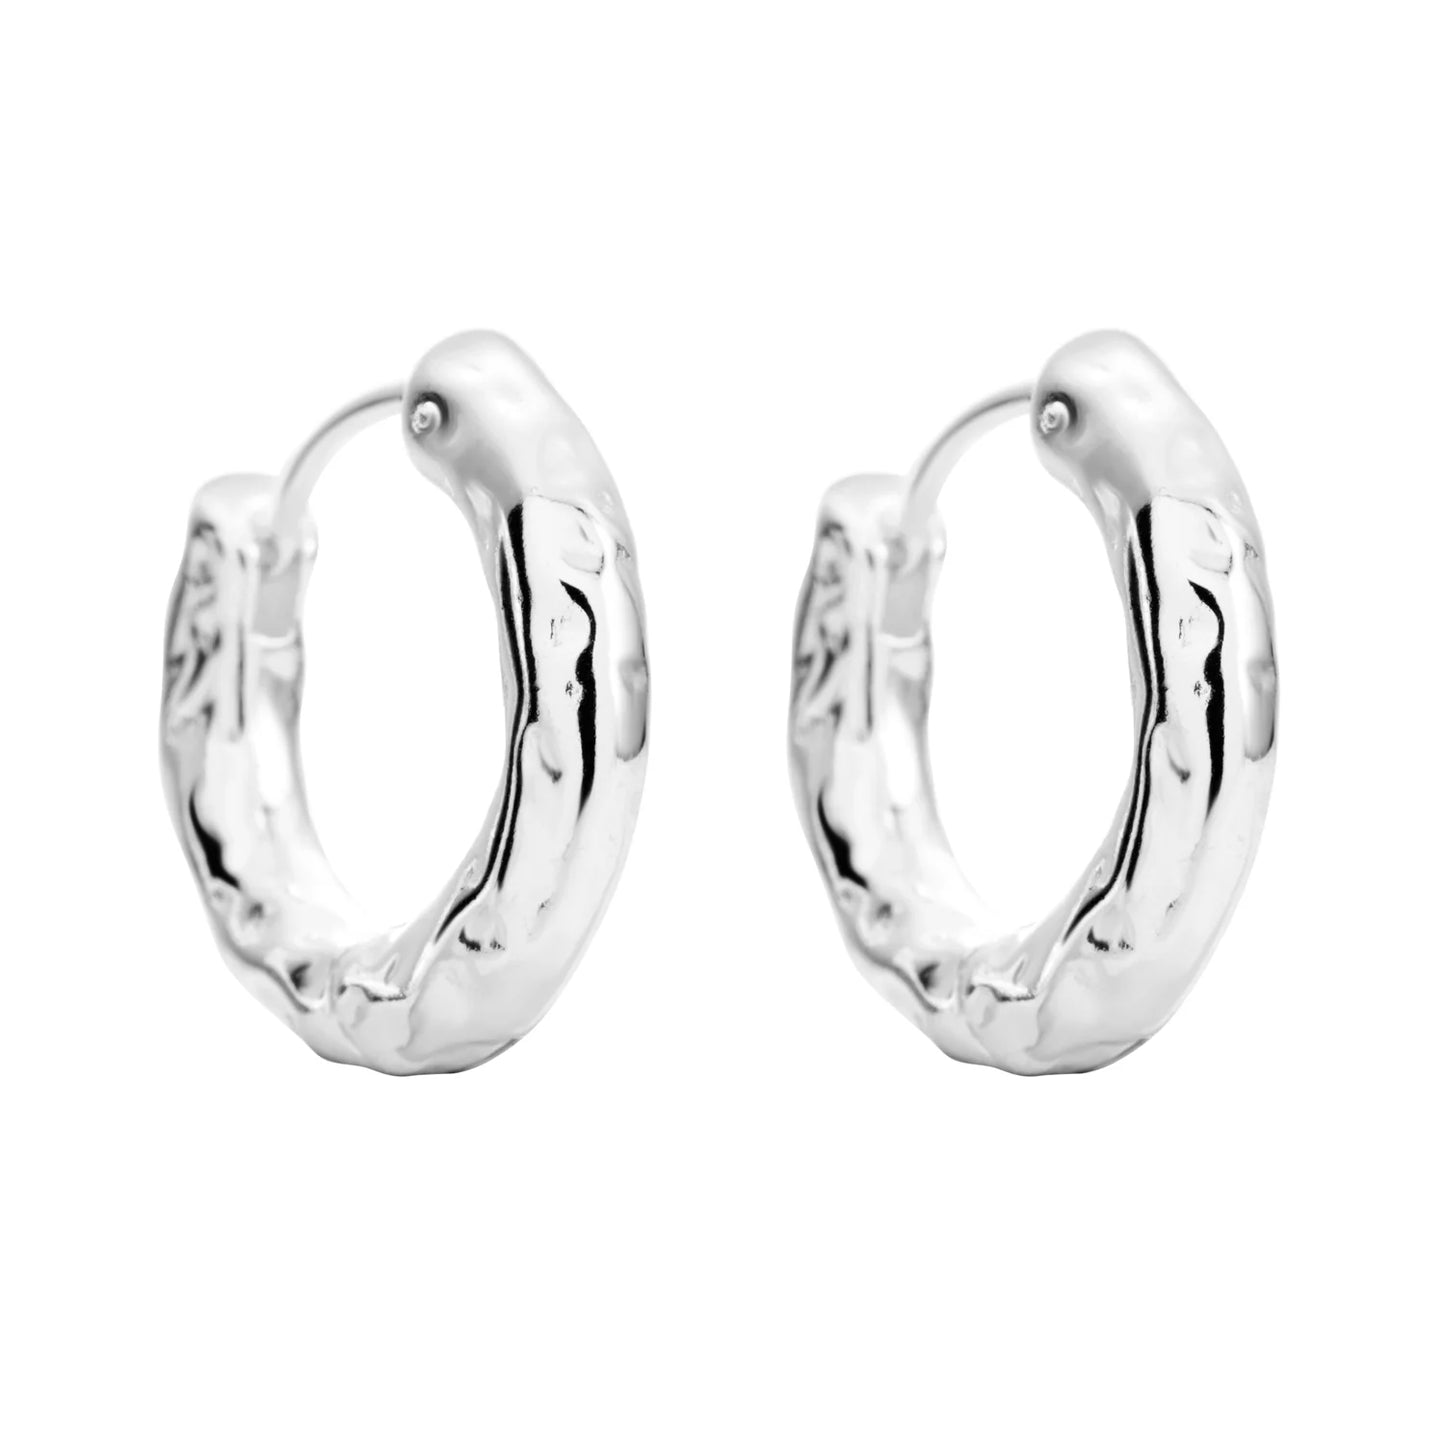 Recycled silver hoop earrings, hypoallergenic, elegant, minimalist design. Materials: 925 sterling silver, rhodium plated. Size: 17 x 17 mm. Weight: 2.9 g per earring.